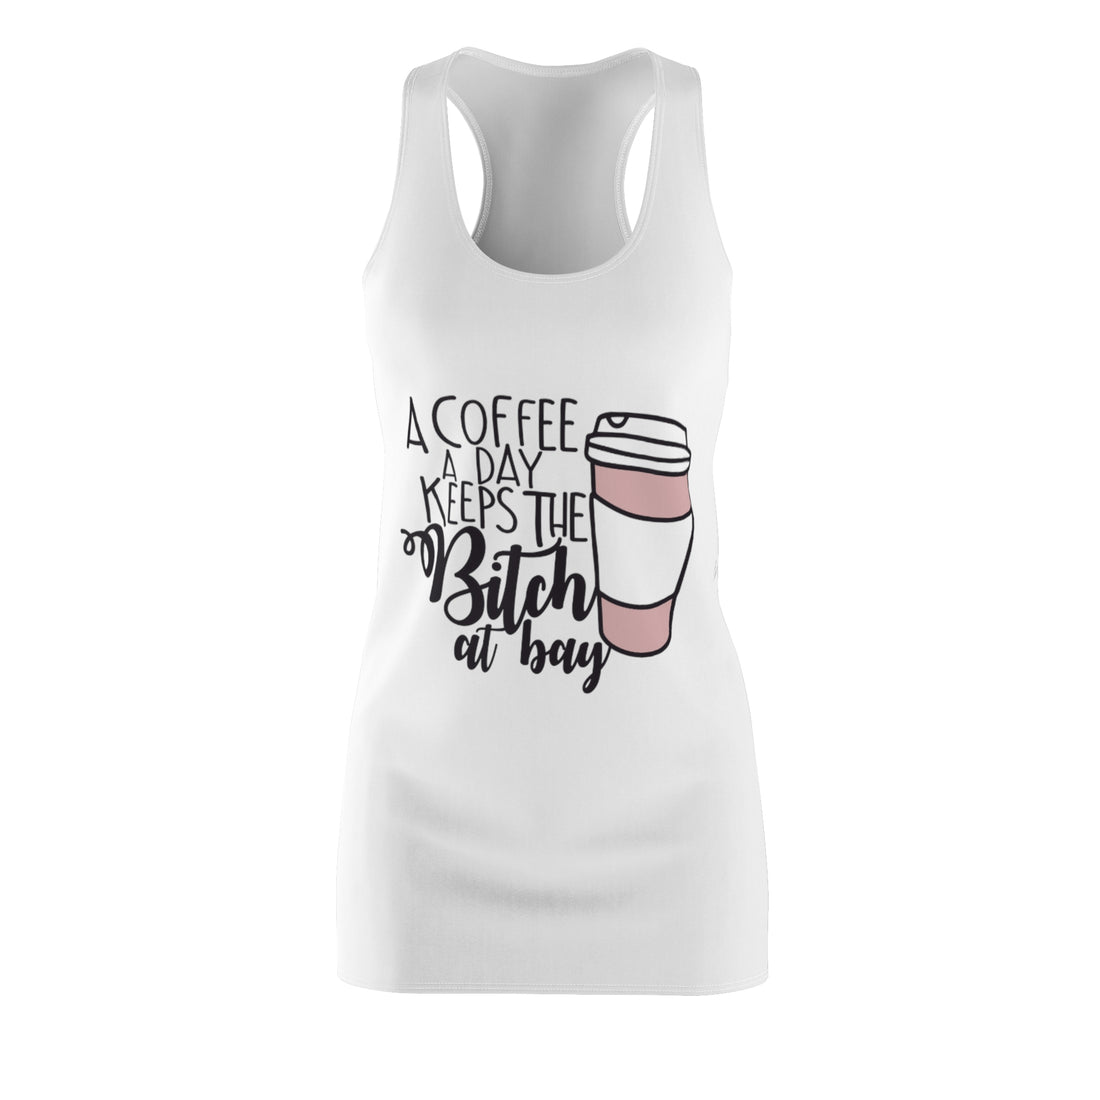 A Coffee a Day Keeps the B!tch at Bay Women&